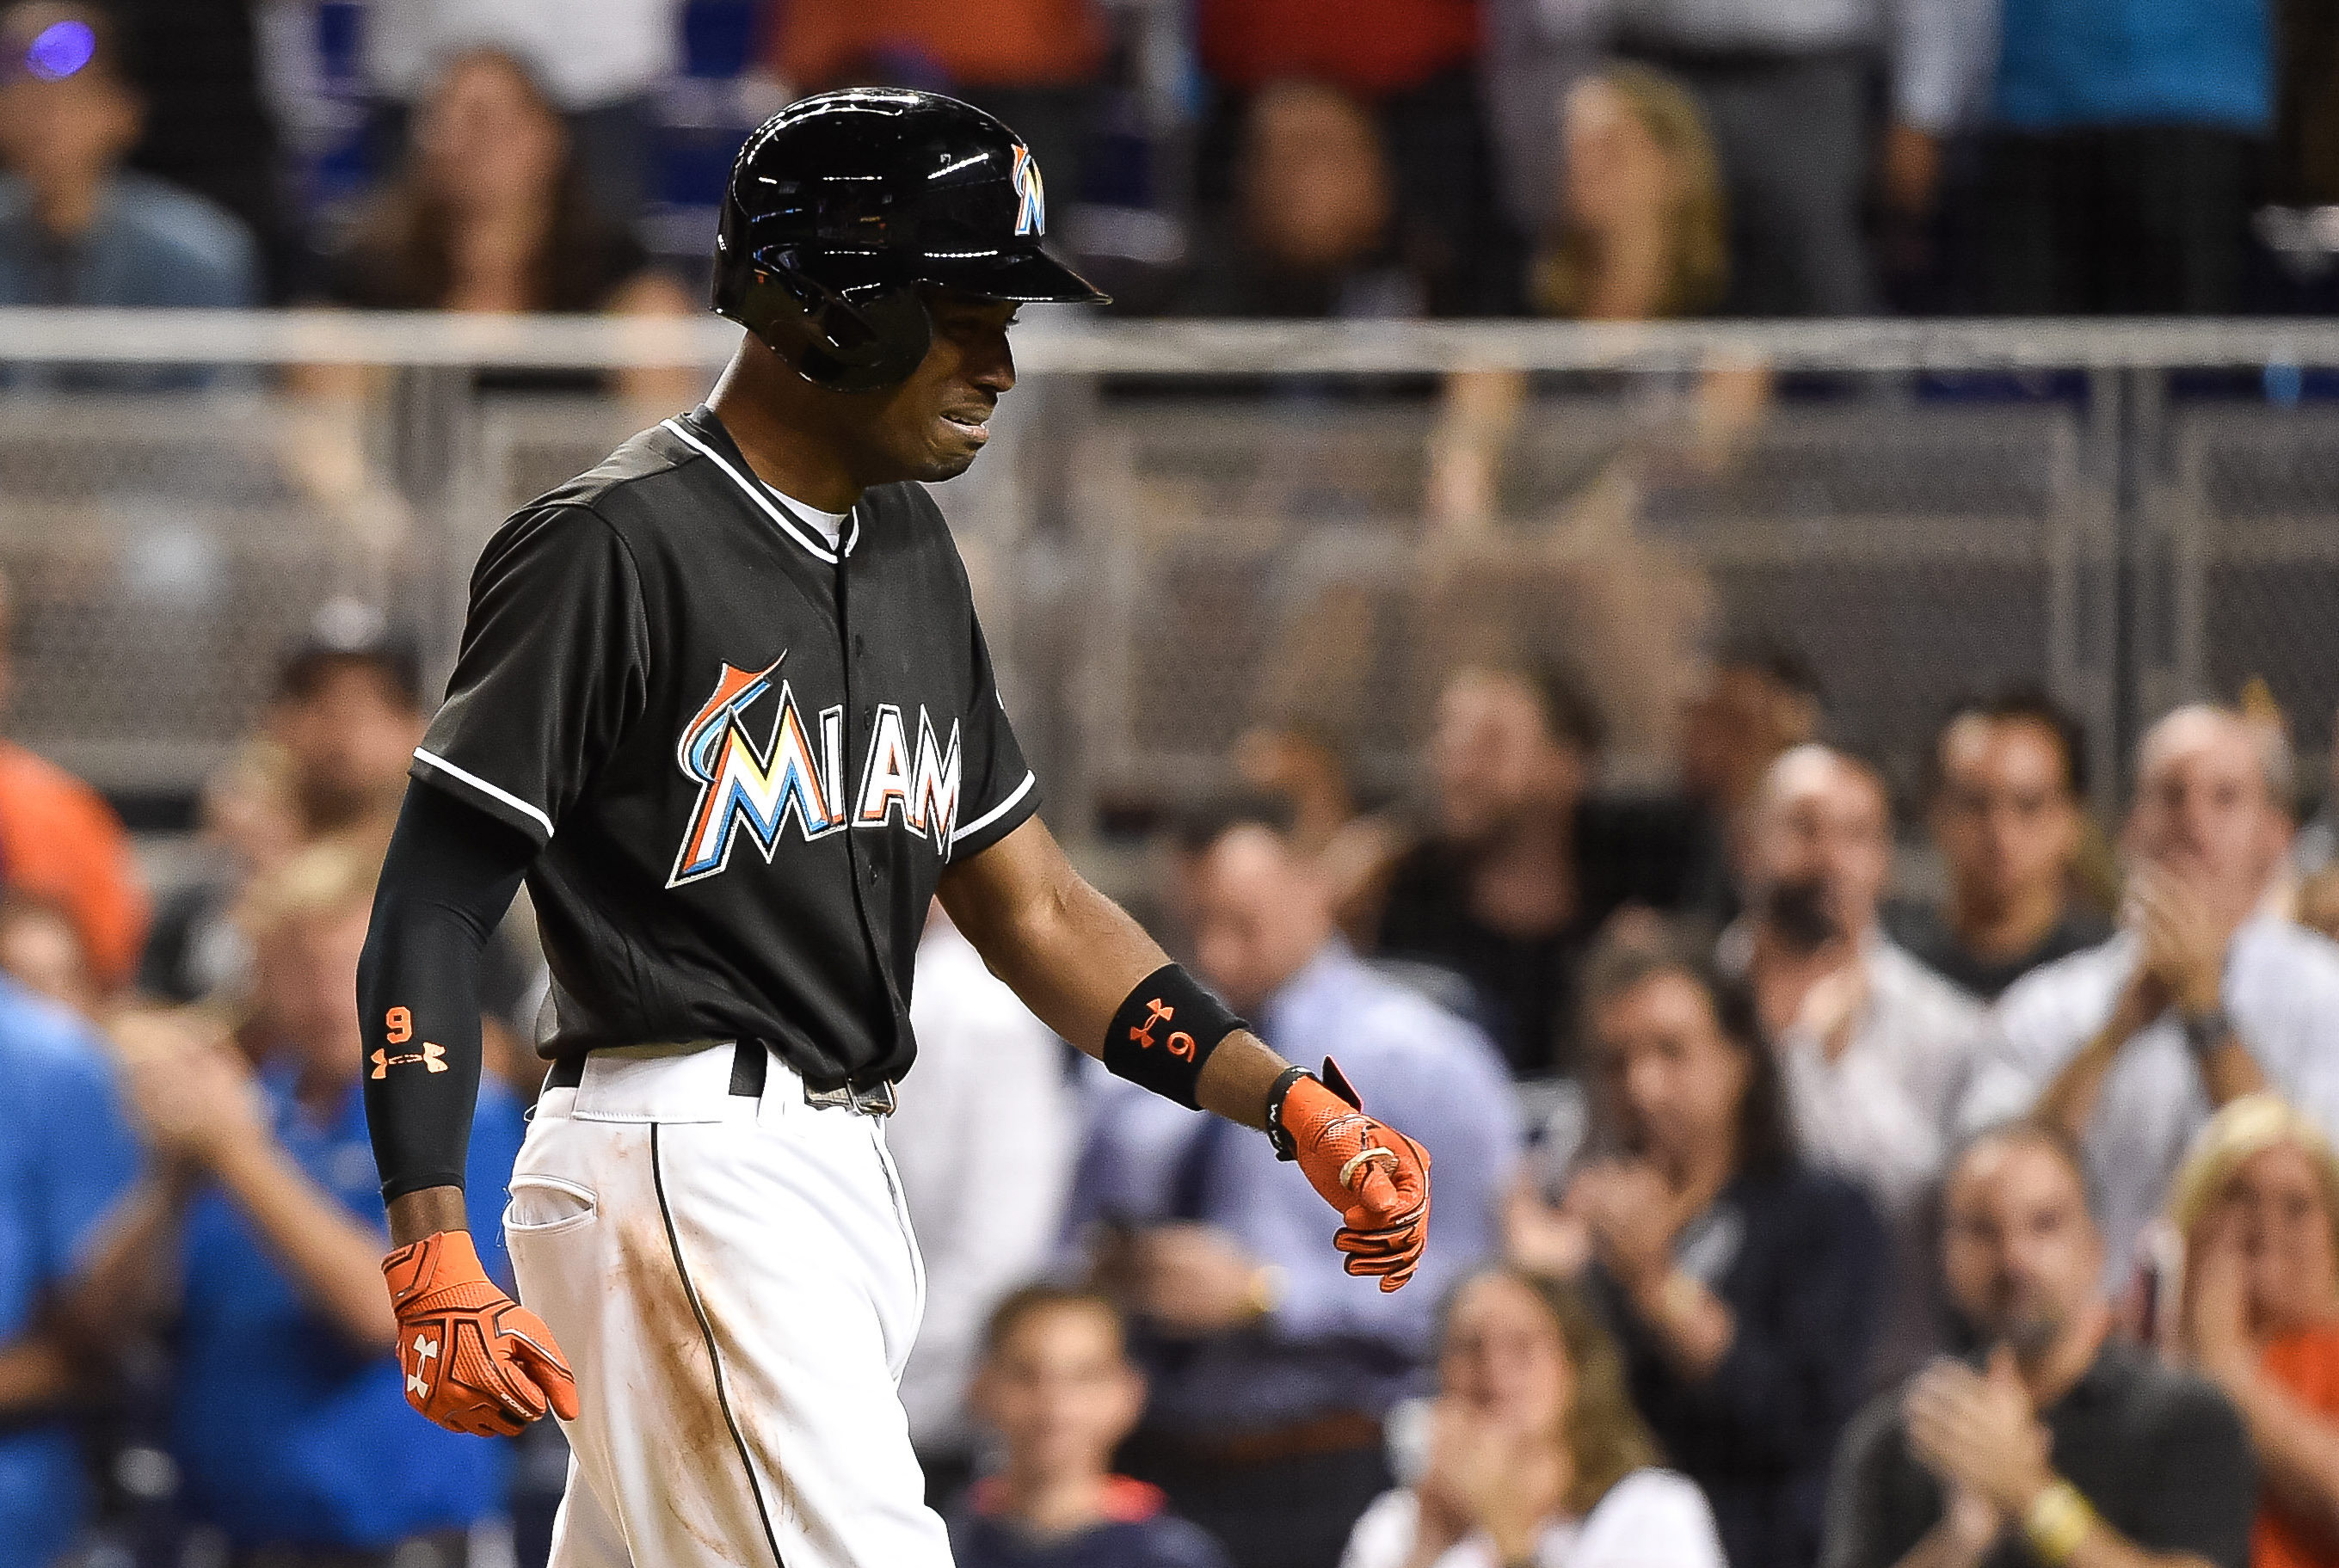 Marlins player hits home run to honor fallen teammate: 'If you all don't  believe in God, you better start' - Deseret News